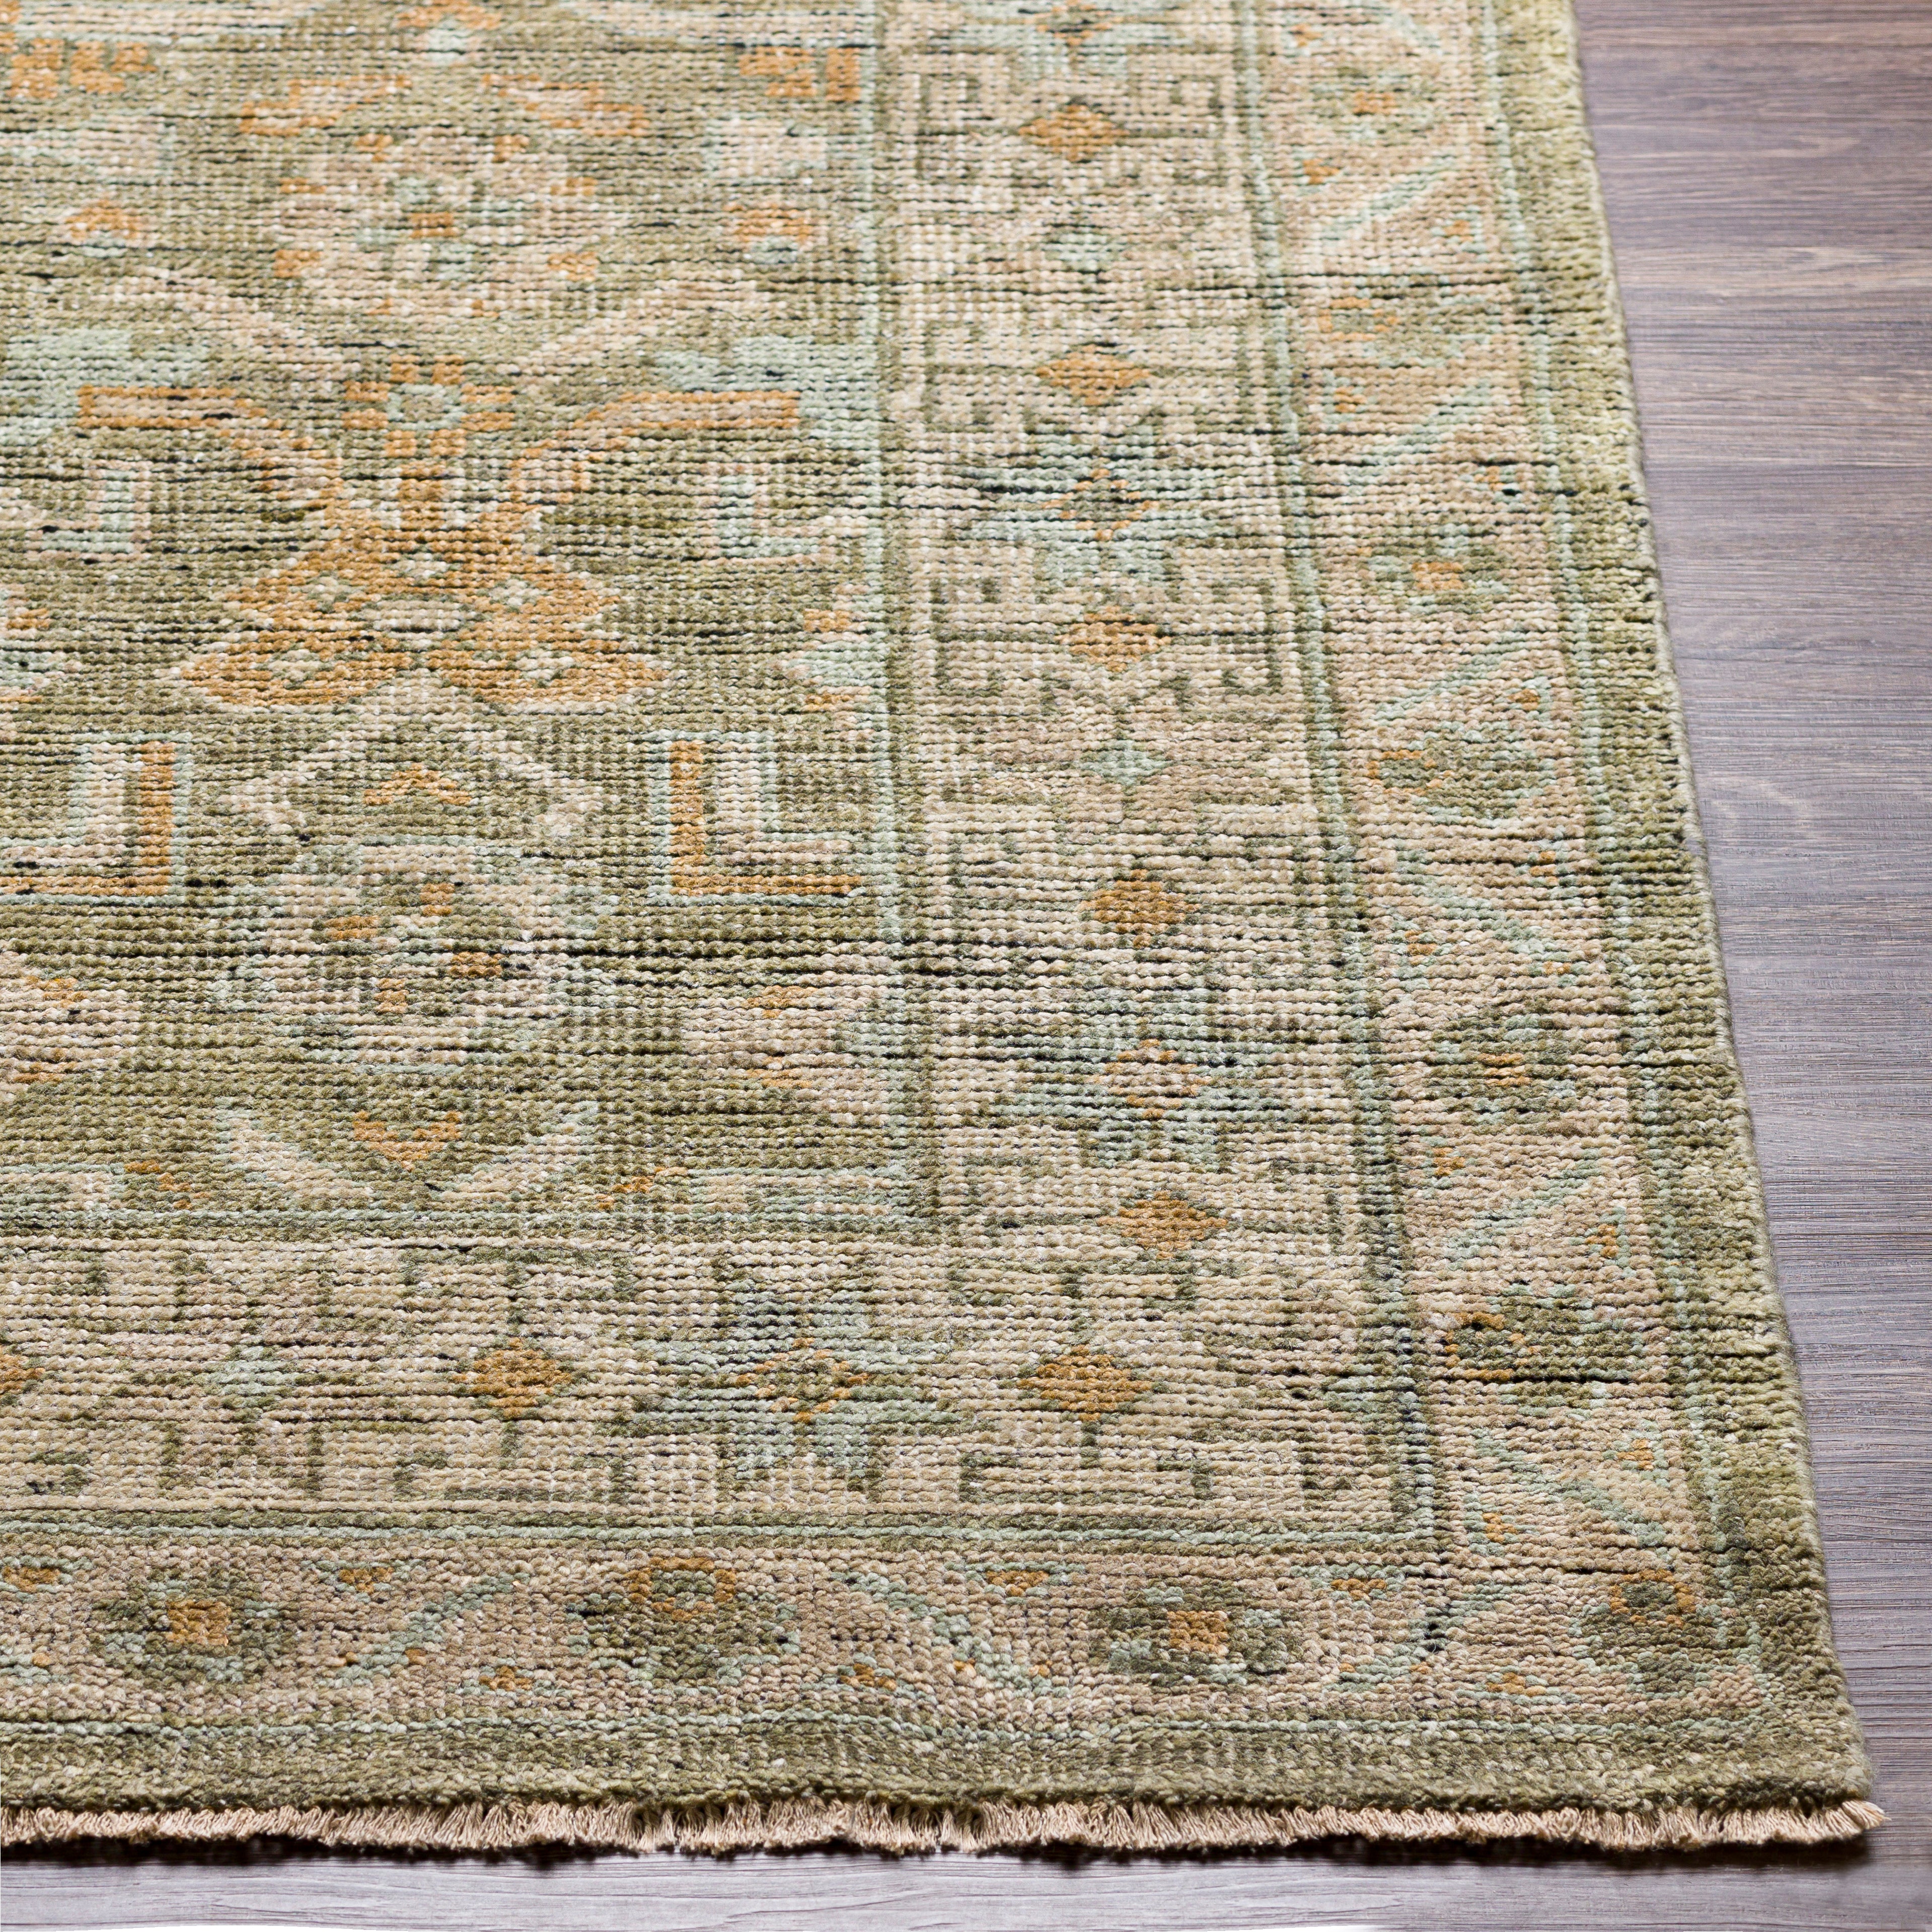 The Reign Collection showcases traditional inspired designs that exemplify timeless styles of elegance, comfort, and sophistication. With their hand knotted construction, these rugs provide a durability that can not be found in other handmade constructions, and boasts the ability to be thoroughly cleaned as it contains no chemicals that react to water, such as glue. AmethystHome provides interior design, new construction, custom furniture, and rugs for Des Moines metro area